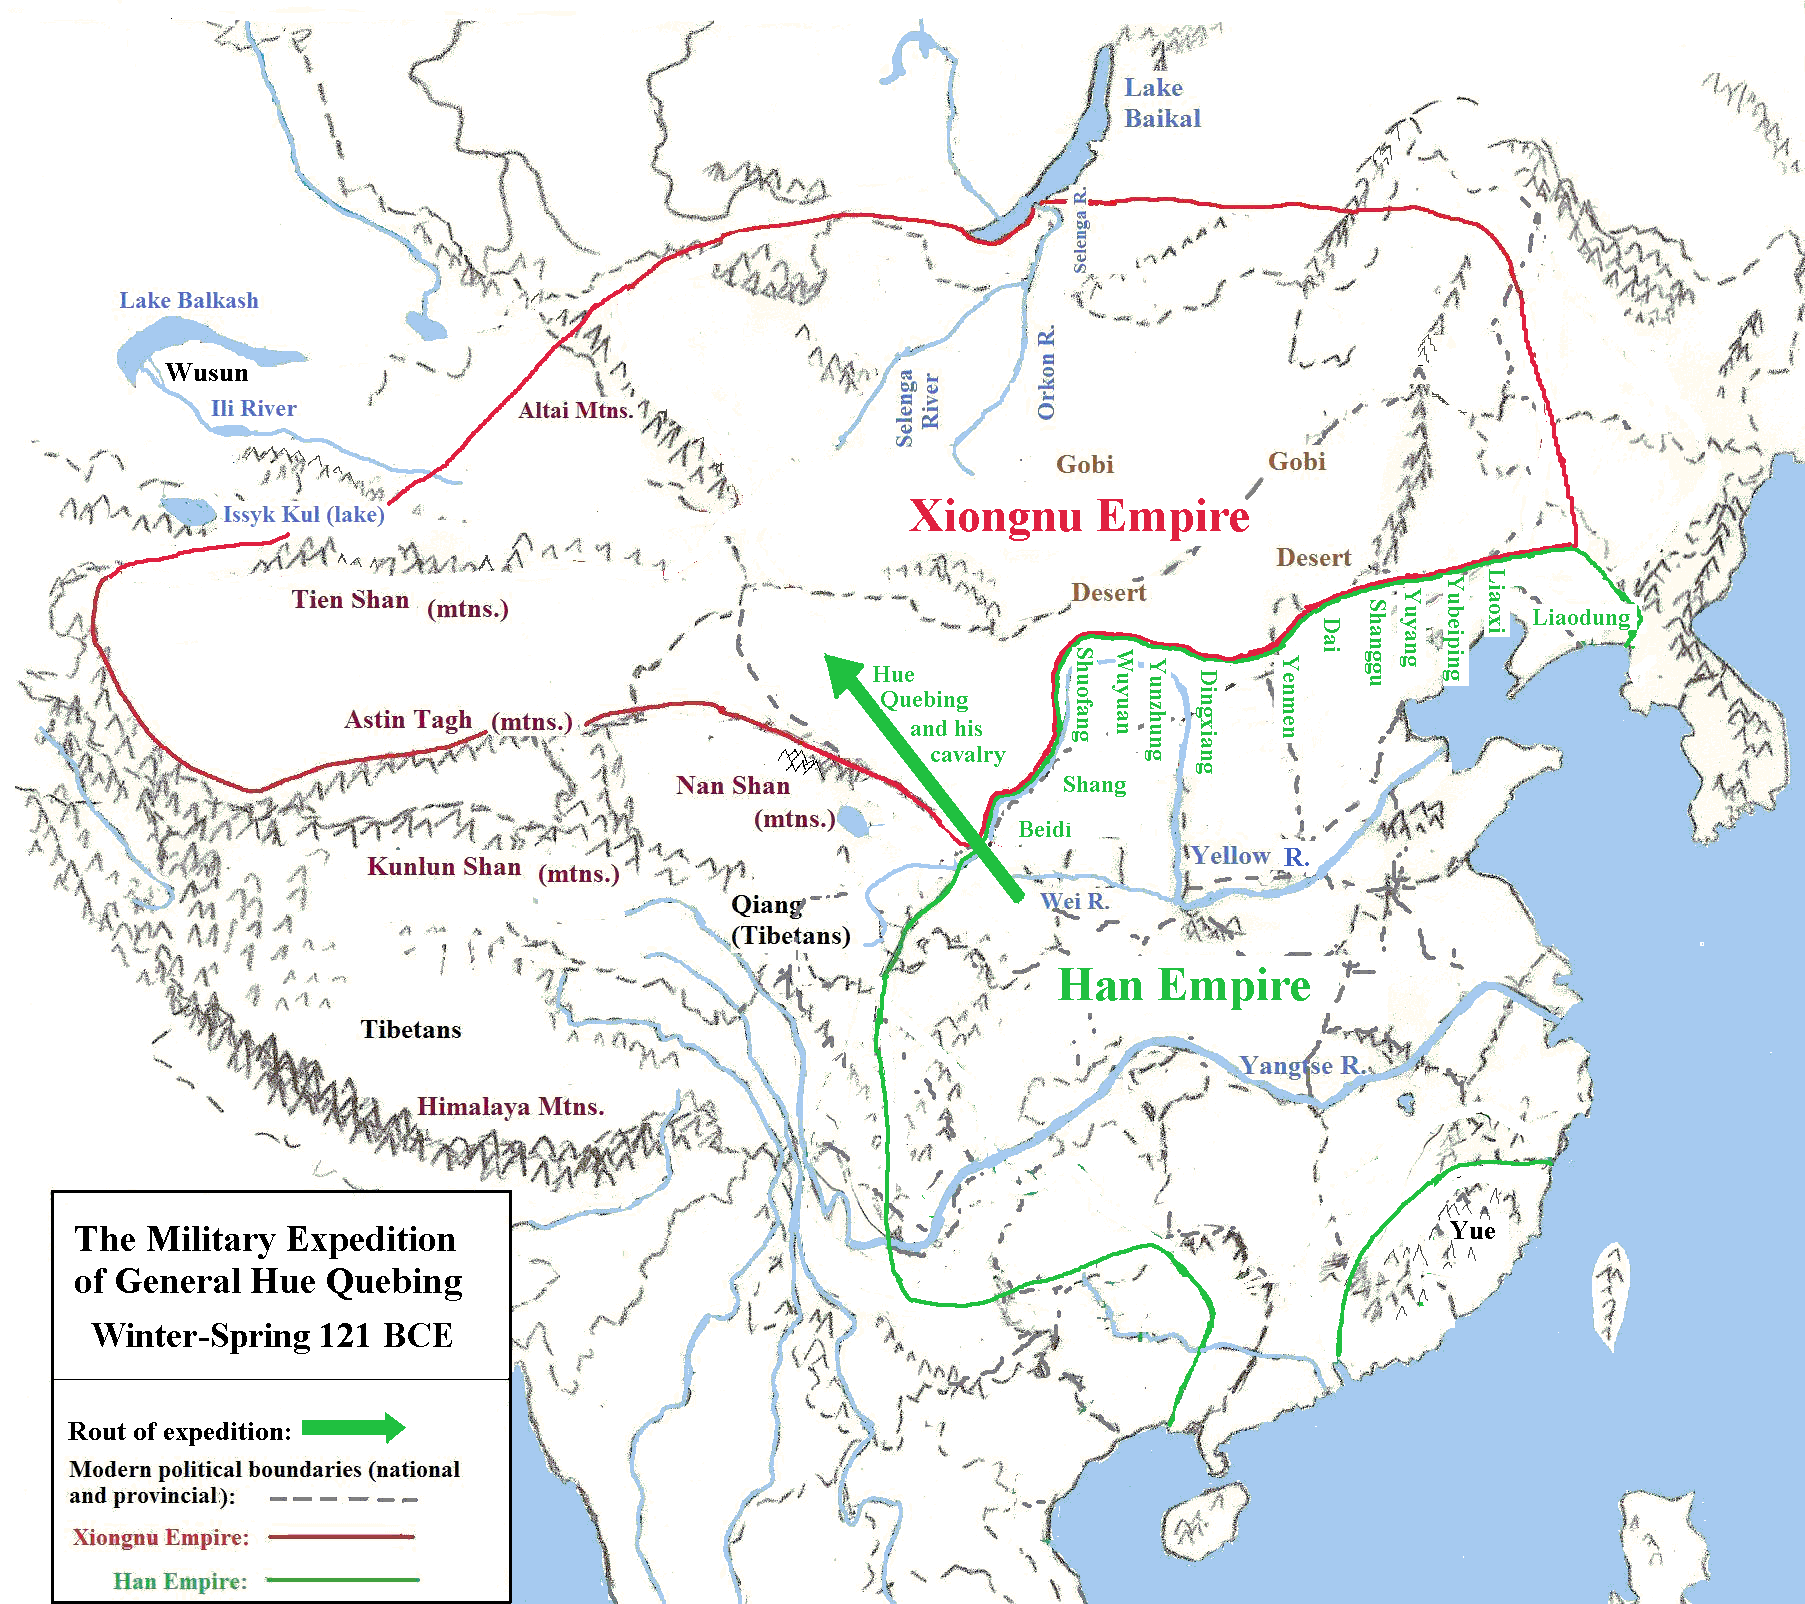 Map showing Hue Quebing's expedition in early 121 BCE